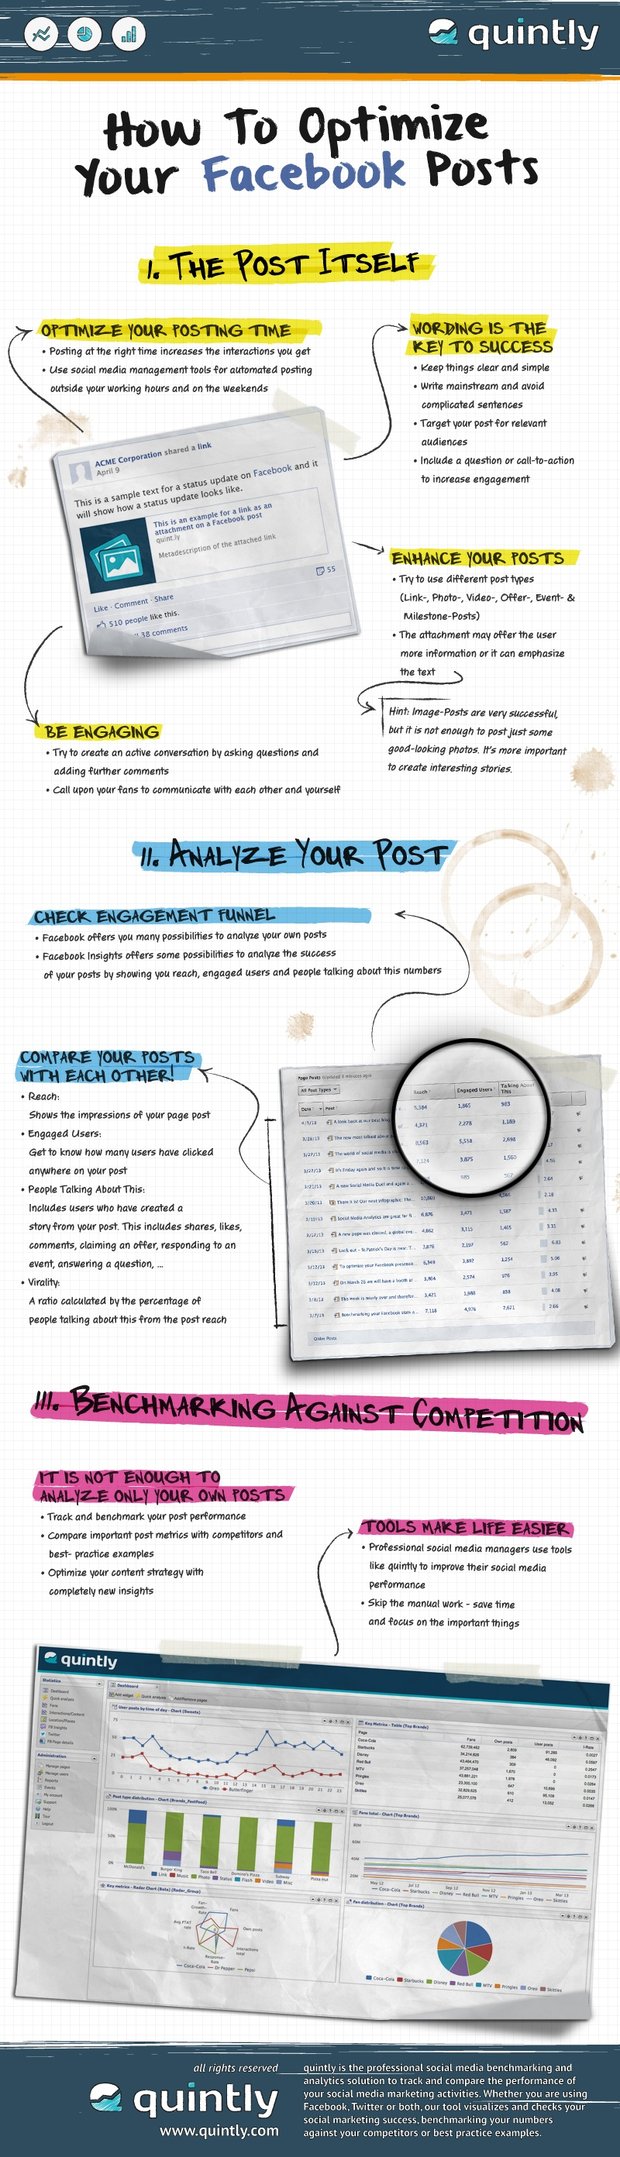 quintly Infographic: How To Optimize Your Facebook Posts